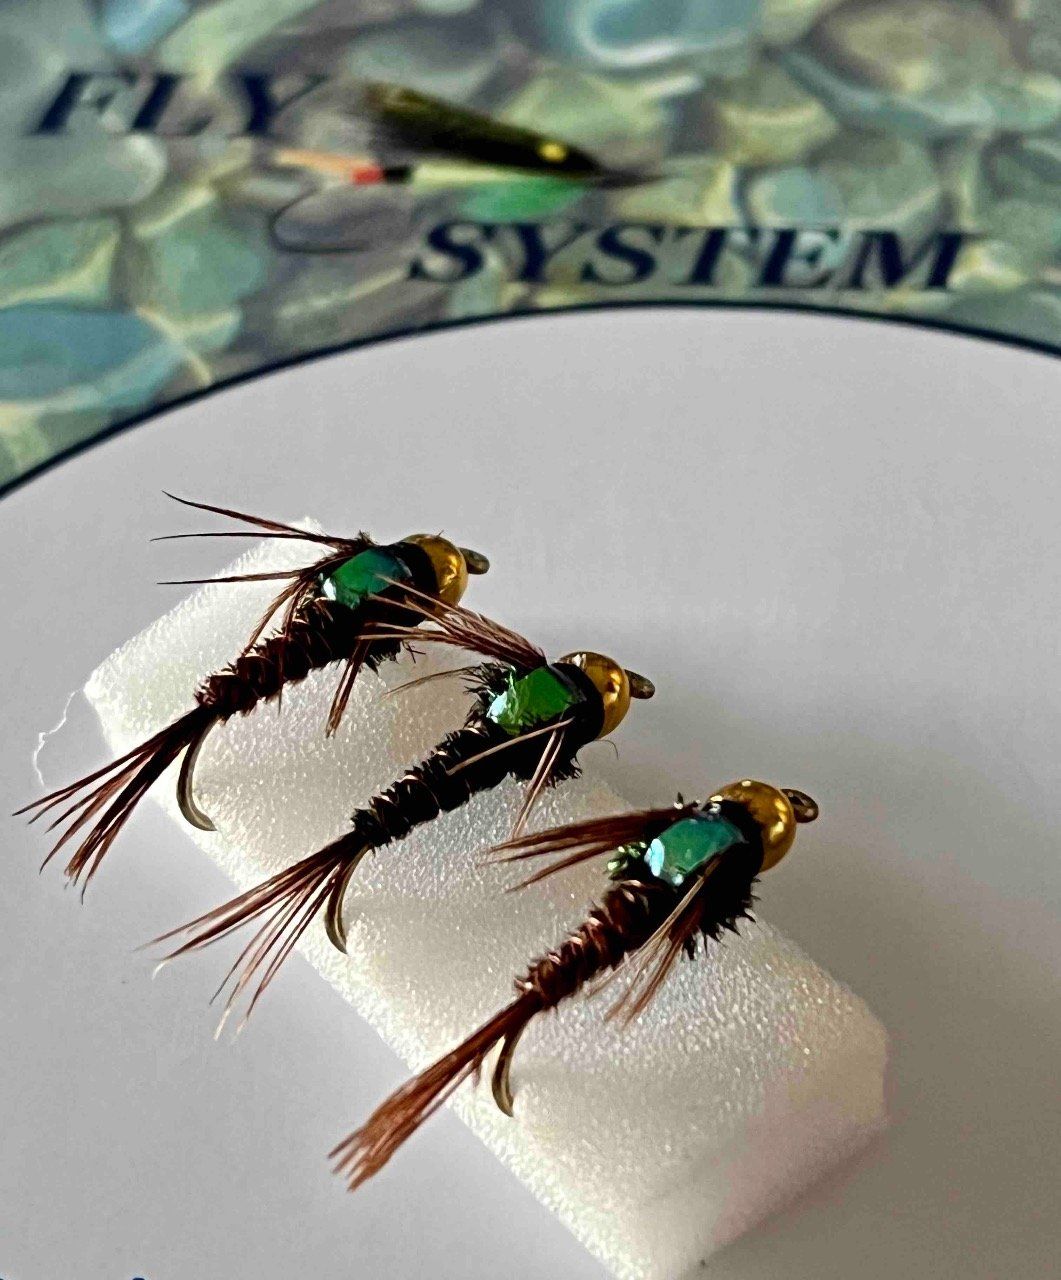 Lot 3 Nymphes laiton FLY SYSTEM "PT 01"